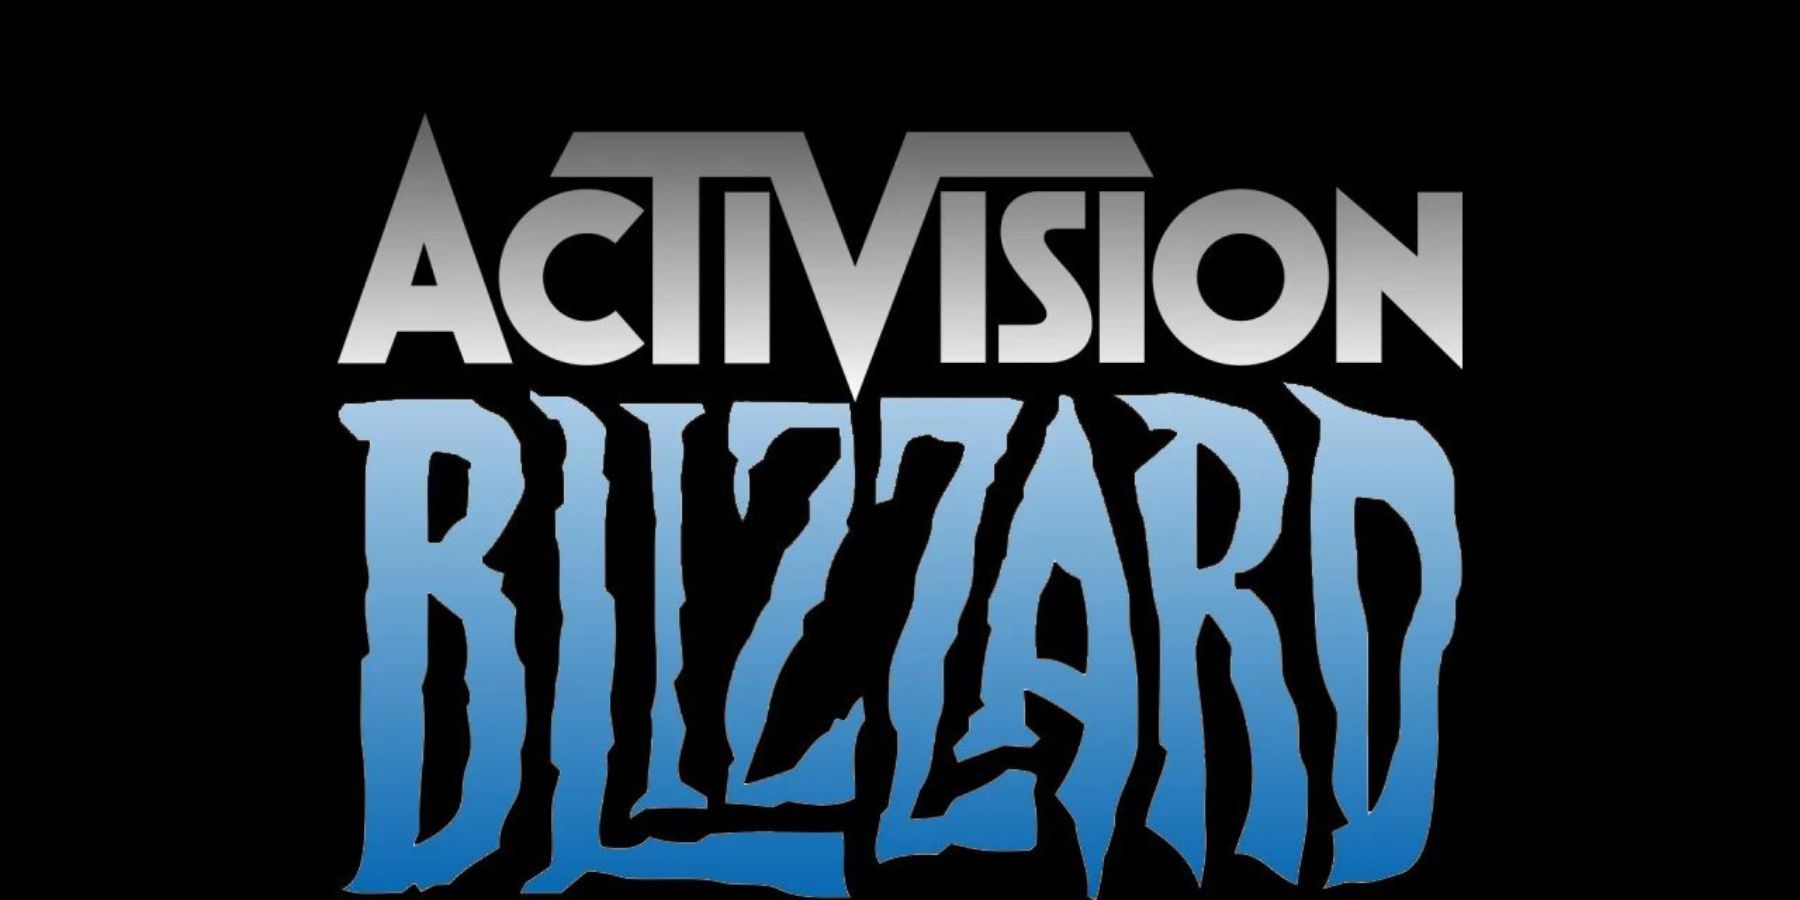 Activision Blizzard Considered Other Offers Before Microsoft Deal